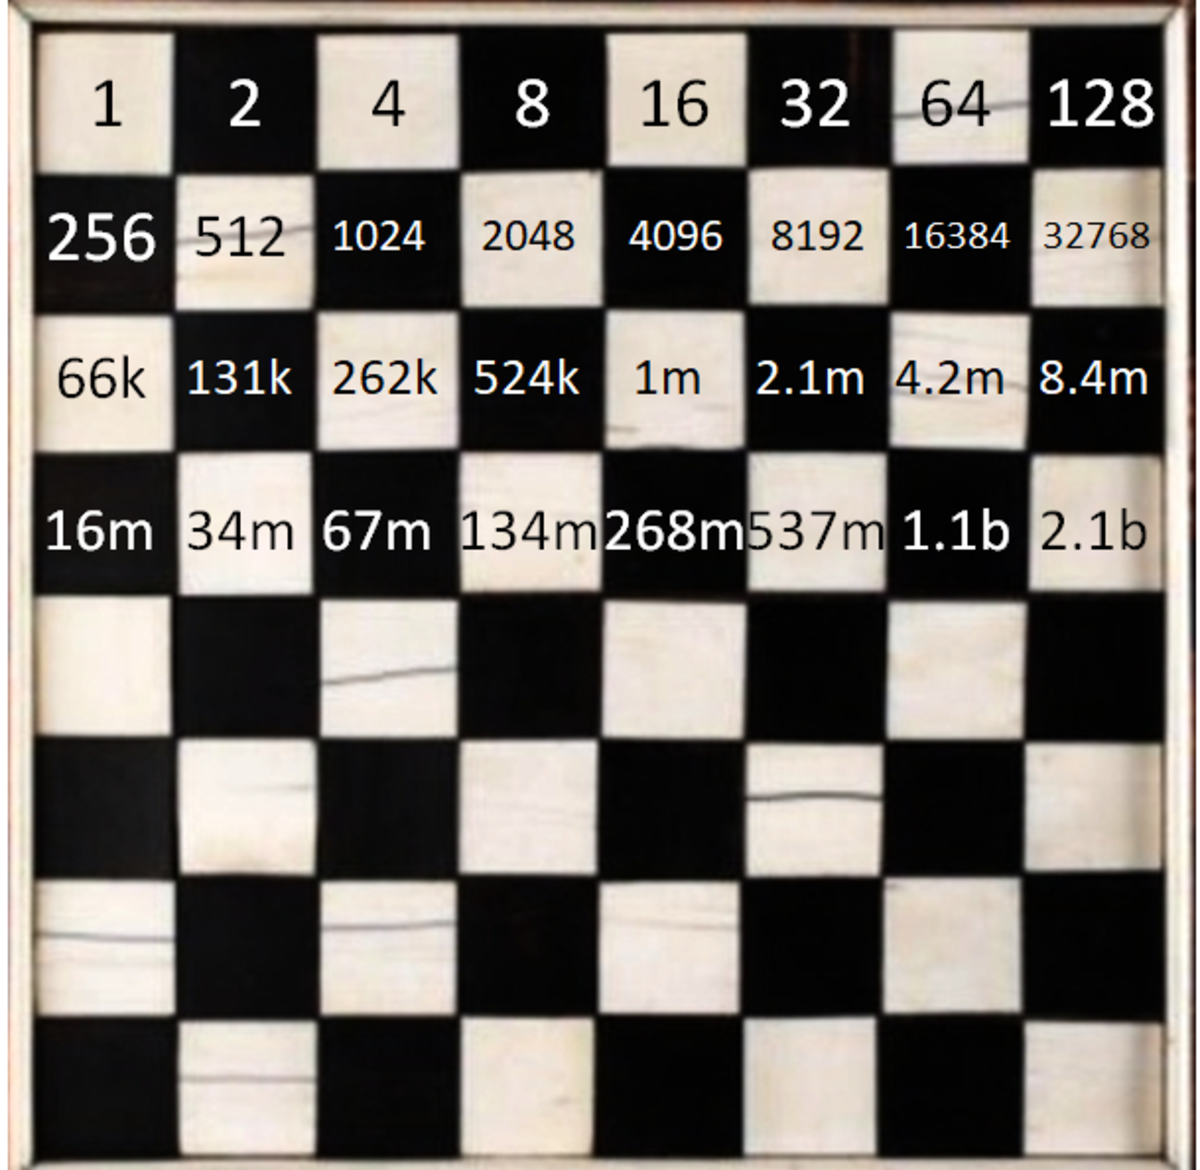 rice-on-a-chessboard-exponential-numbers